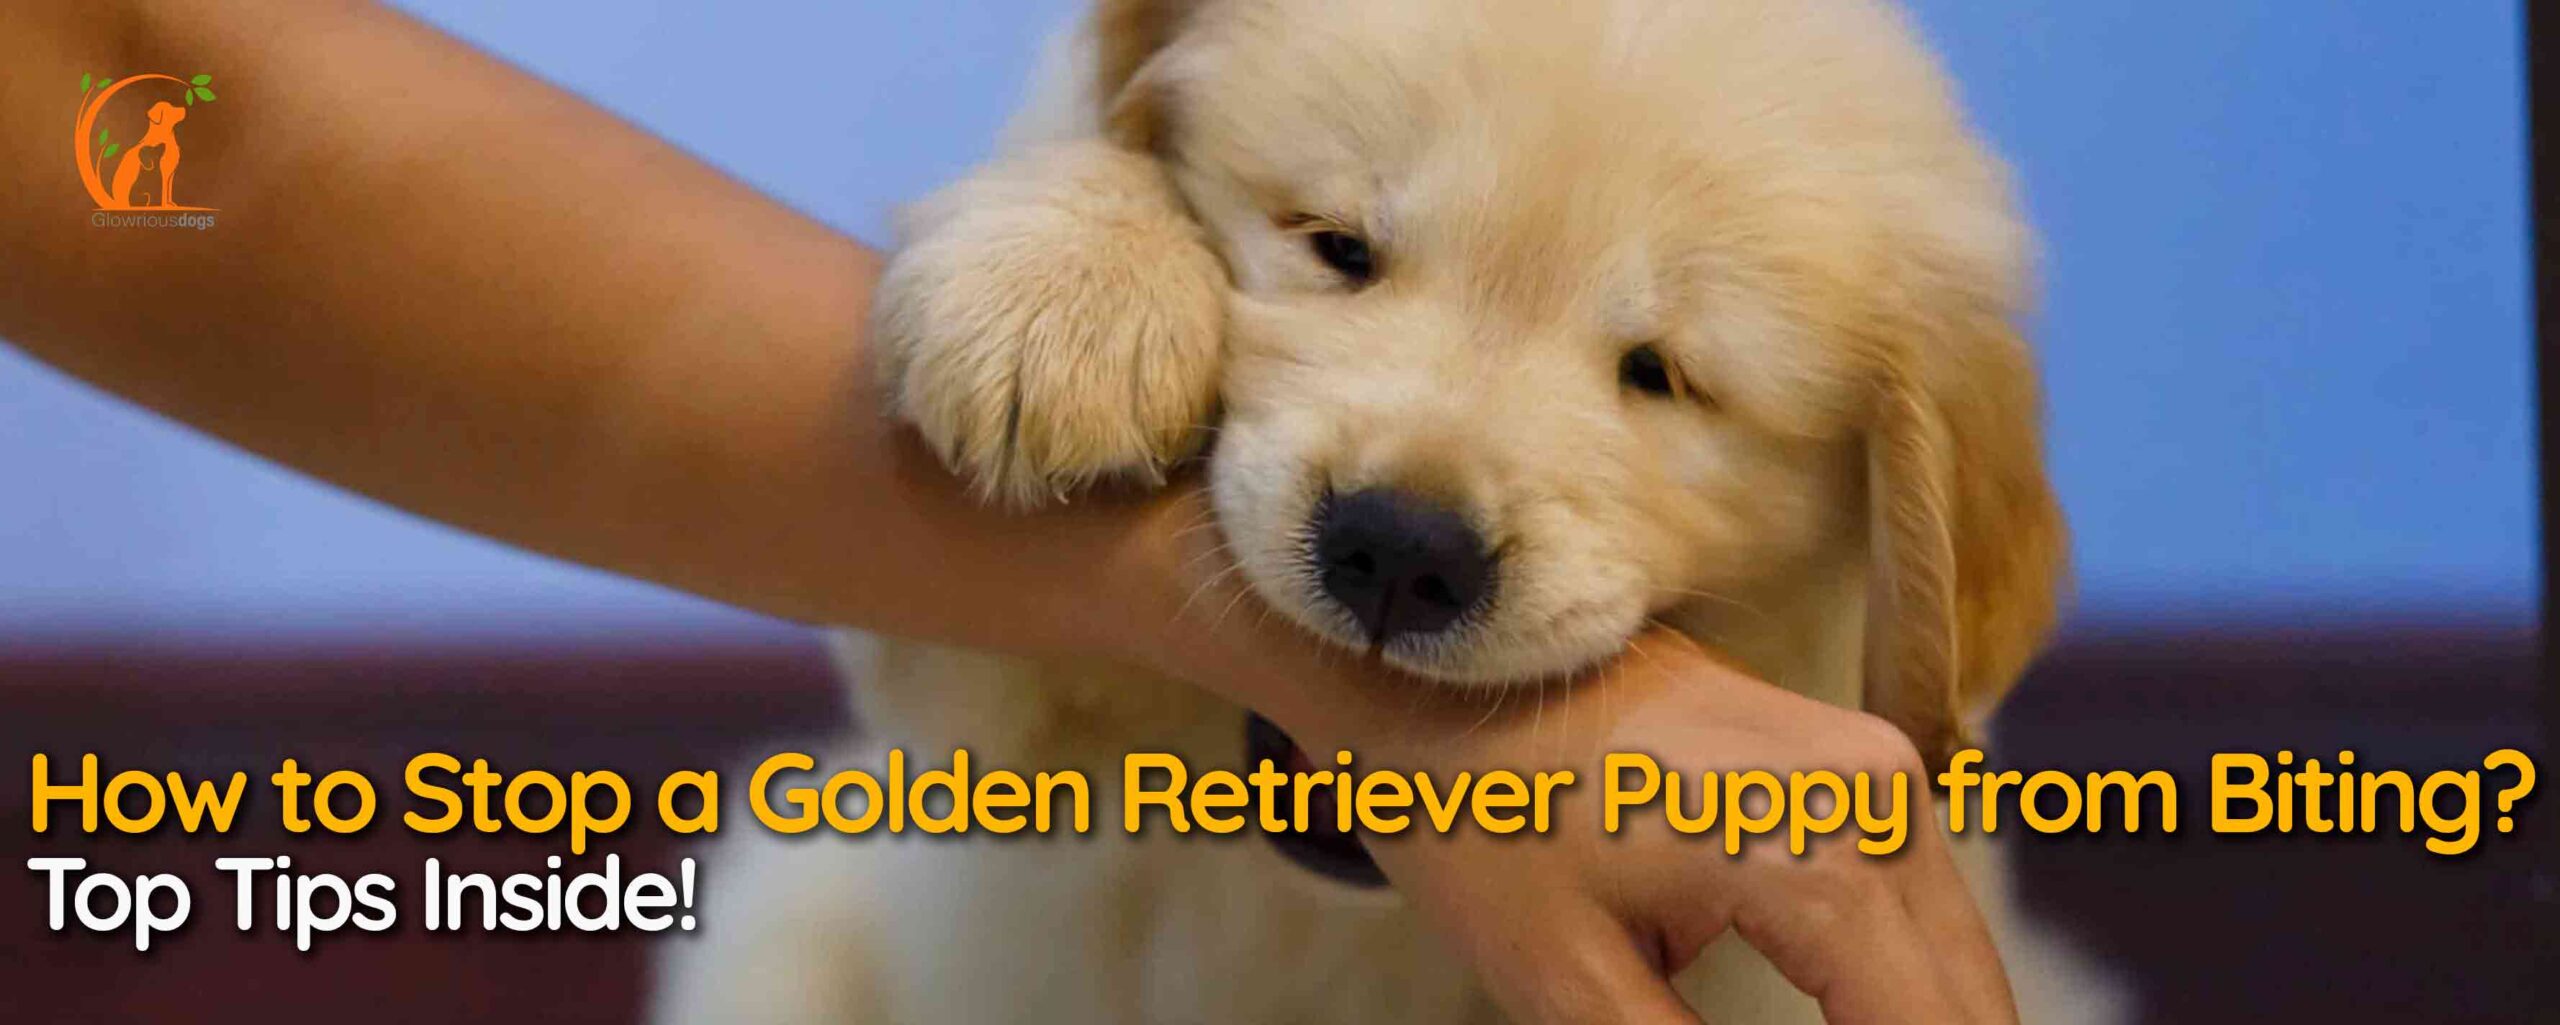 How to Stop a Golden Retriever Puppy from Biting? Top Tips Inside!